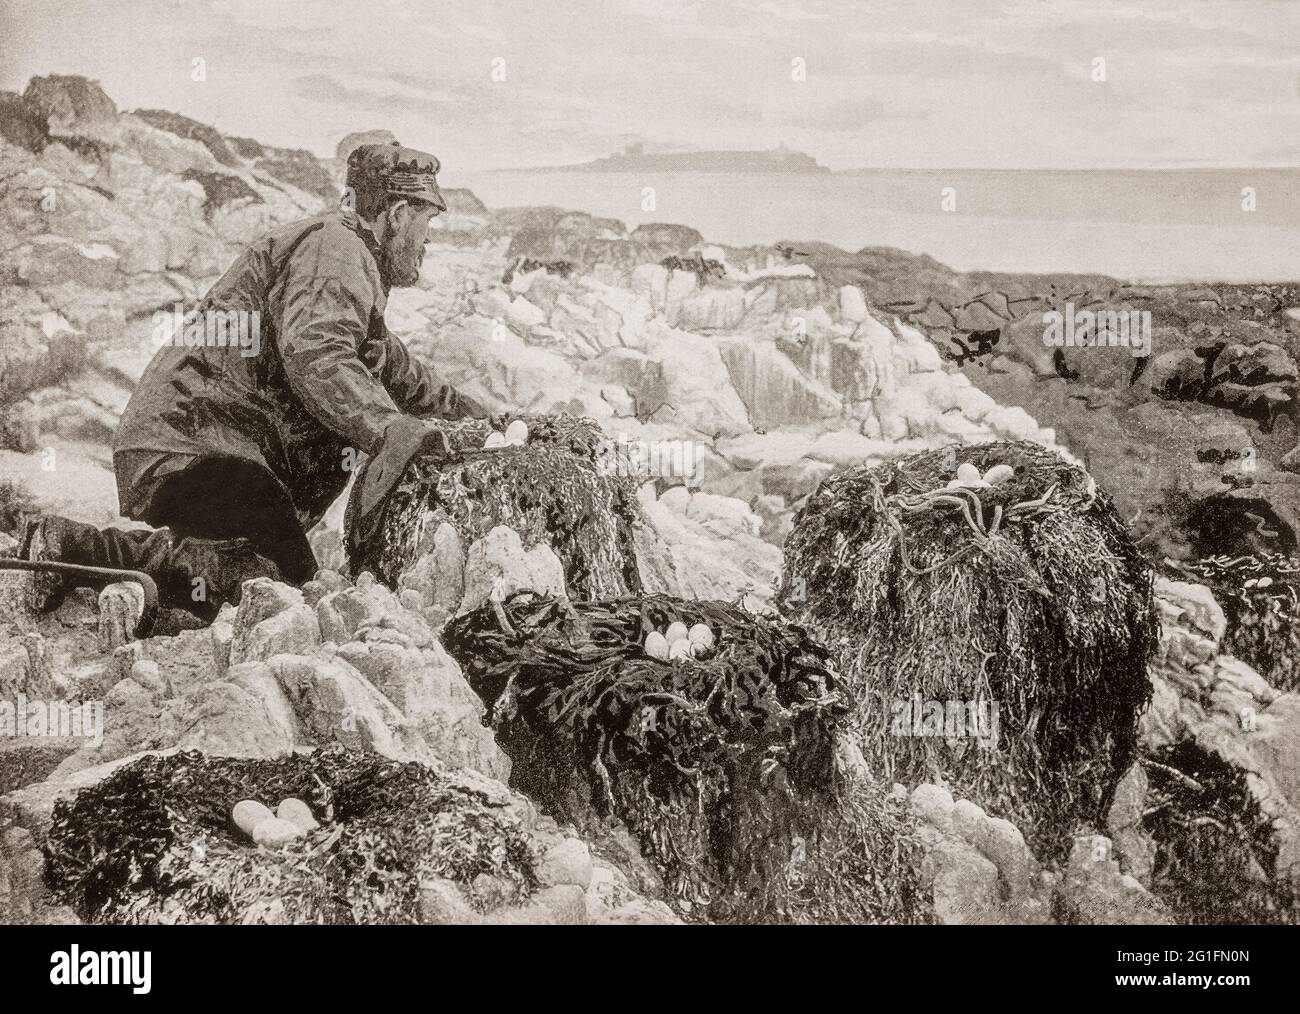 A late 19th century view of a local taking Cormorants eggs on the Farne Islands, a group of islands off the coast of Northumberland, England. They were first recorded in 651, when they became home to Saint Aidan, followed by Saint Cuthbert who died there in 687. The islands were used by hermits intermittently until the last hermit died on the islands in 1246. The islands are also associated with Grace Darling, daughter of the Longstone lighthouse-keeper William Darling, who both rescued nine people from the wreck of the Forfarshire in a strong gale and thick fog, the vessel having run aground Stock Photo